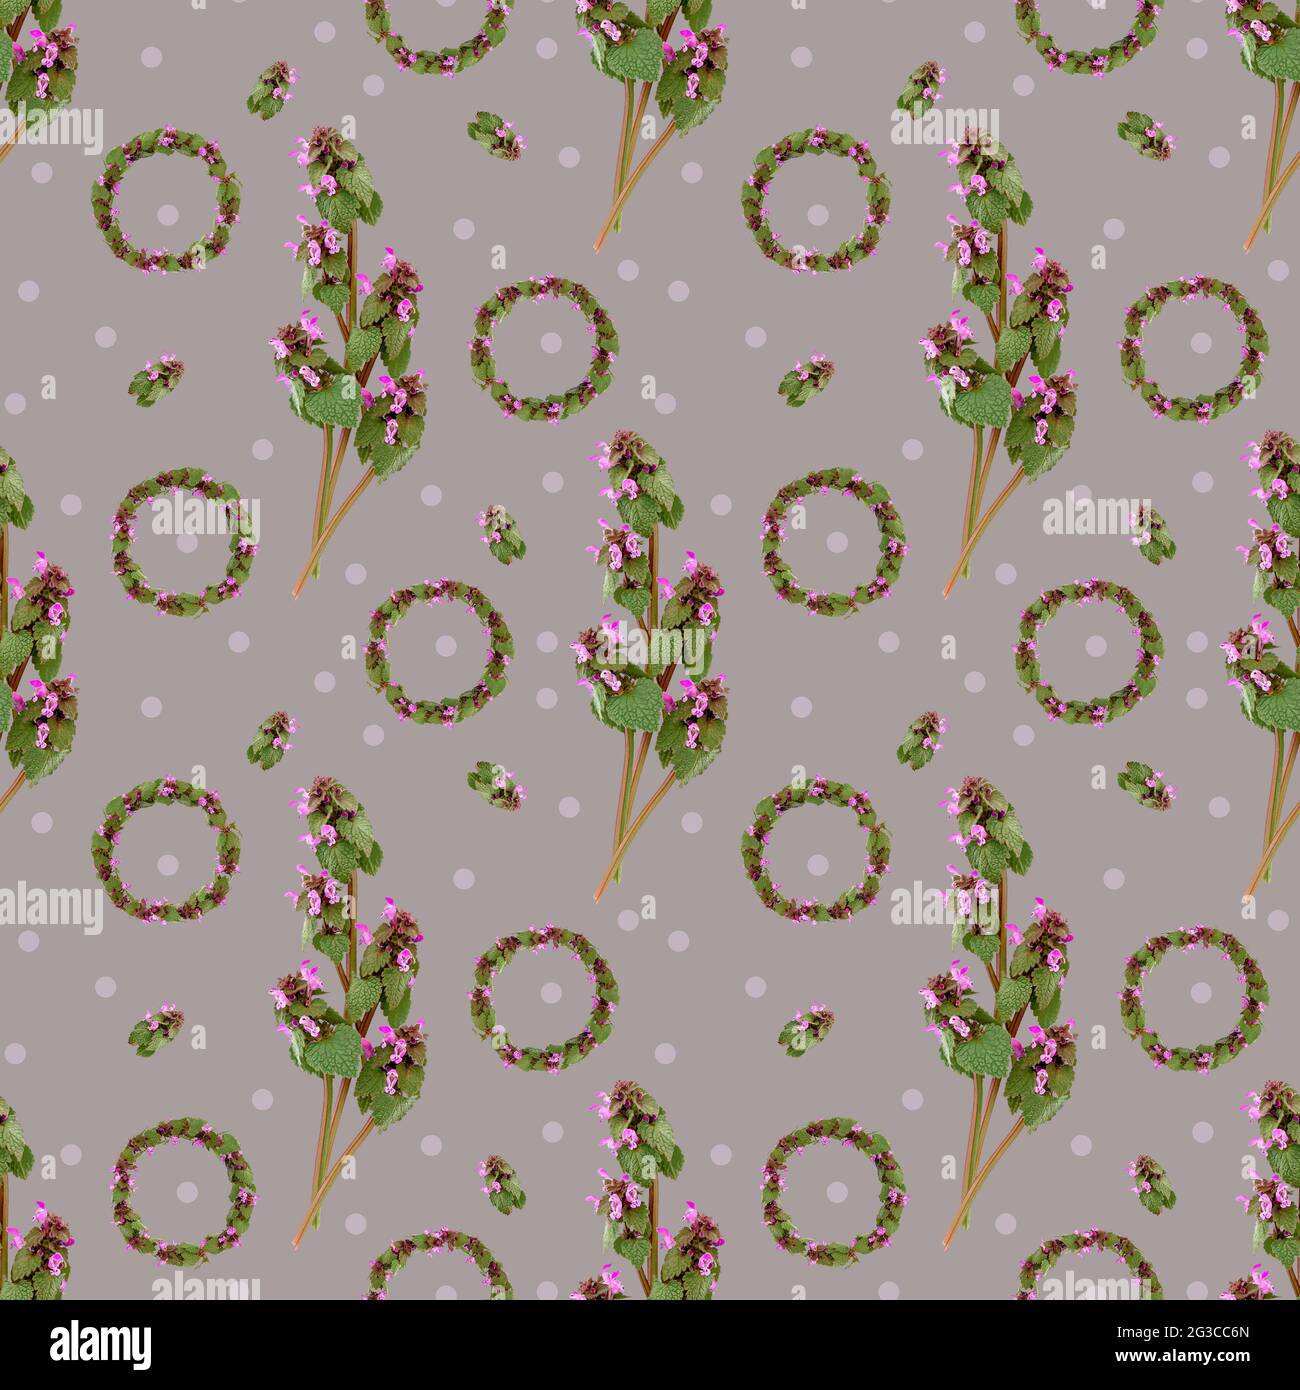 Seamless pattern of wild spring flowers and branchlets on a gray background Stock Photo